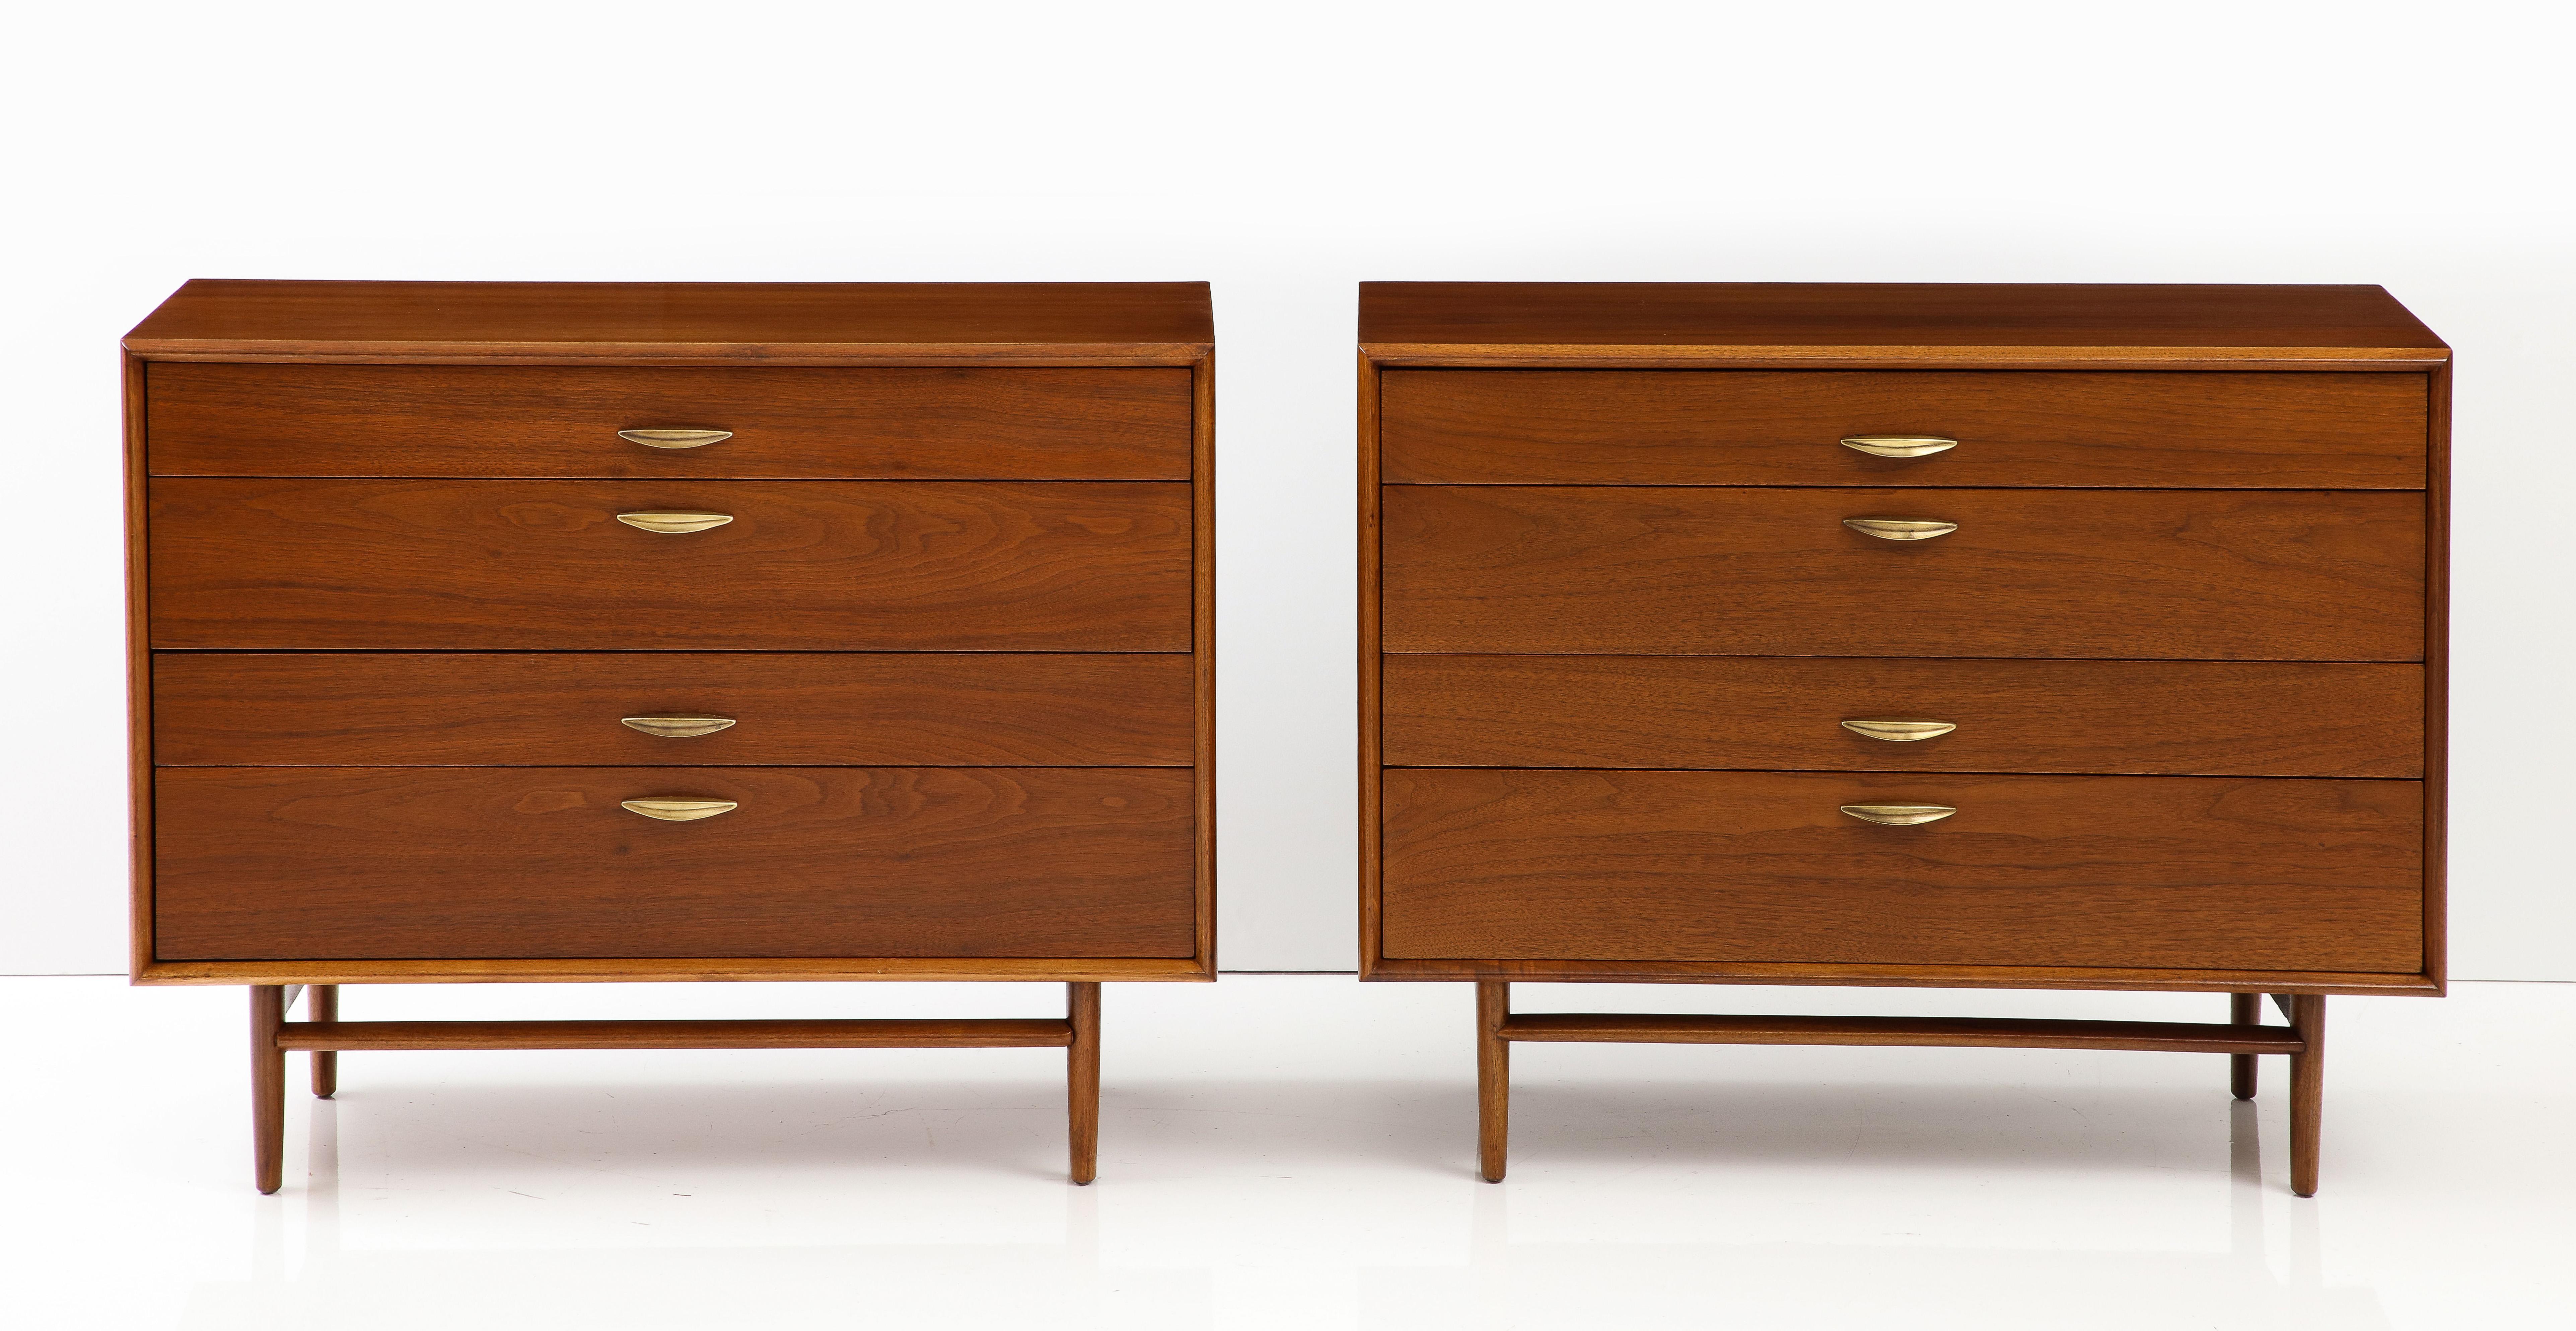 Amazing pair of late 1950's drexel 4 drawer walnut dressers with solid brass handles from the Parallel Collection, fully restored with minor wear and patina due to age and use.